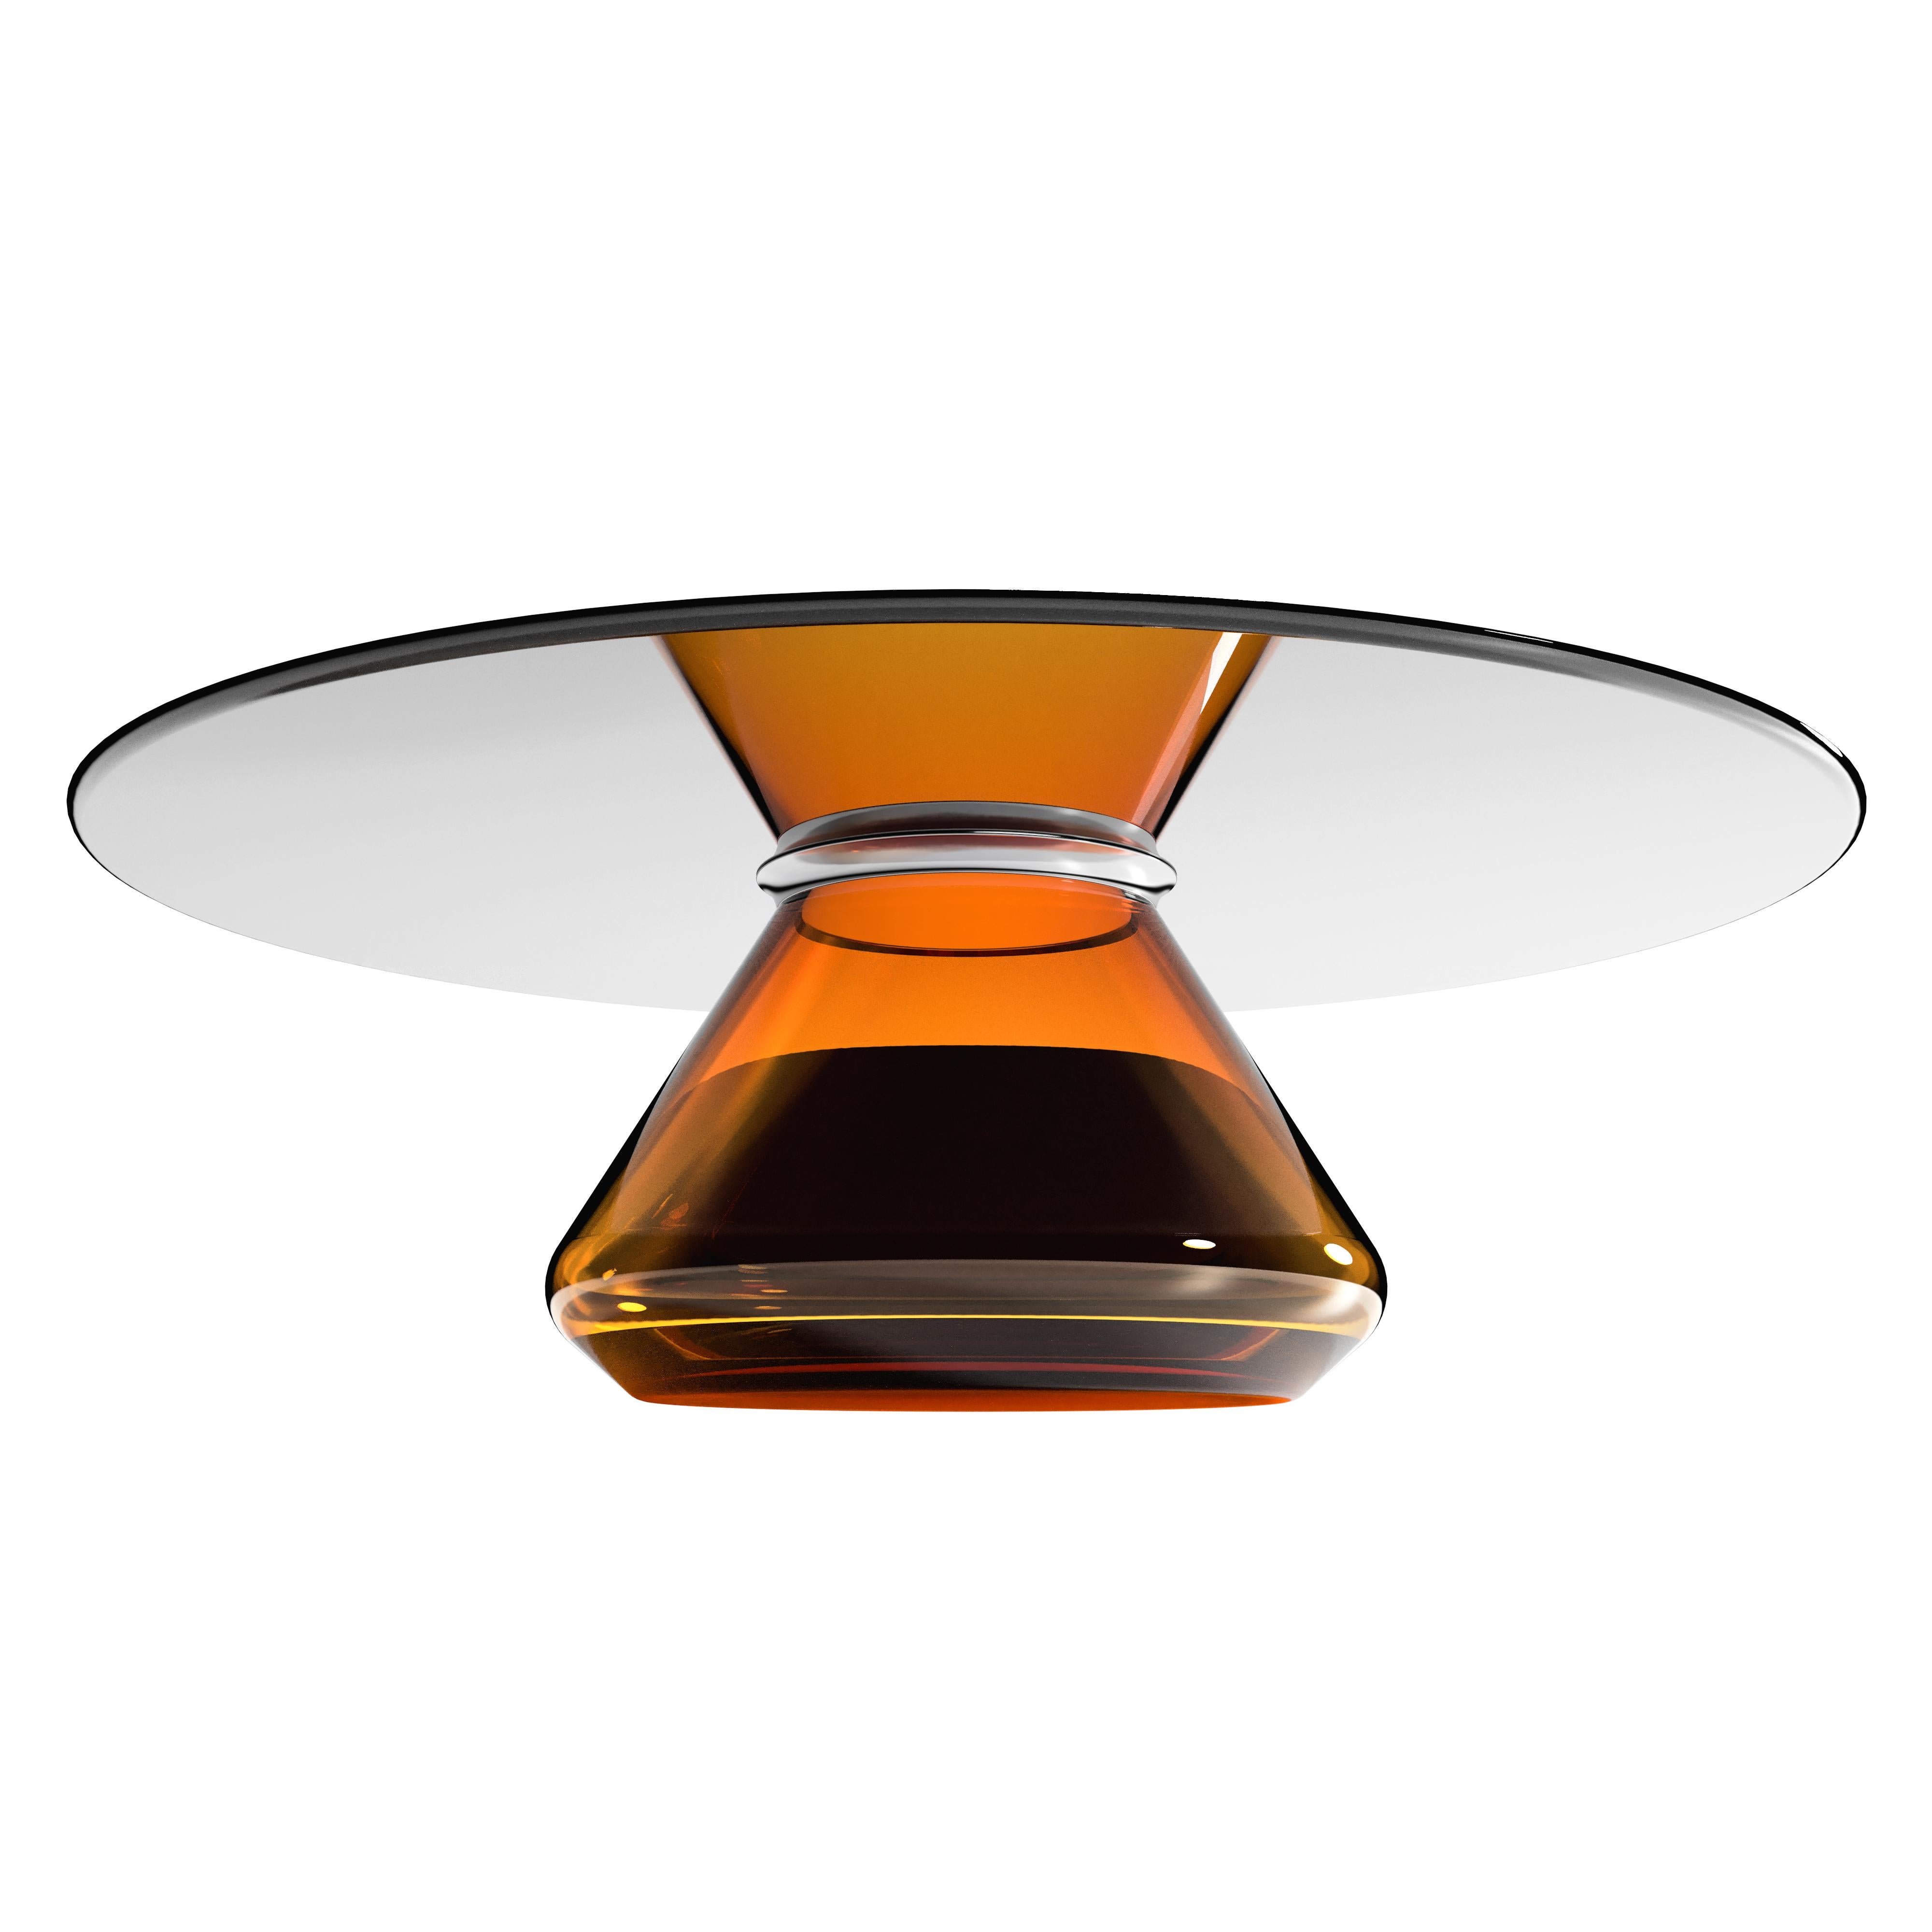 The Amber Eclipse II coffee table by Grzegorz Majka.
Limited Edition of 8
Dimensions: 40 x 40 x 12.40 in
Materials: Glass

The total eclipse of every interior? With this amazing table everything is possible as with its Minimalist style it will